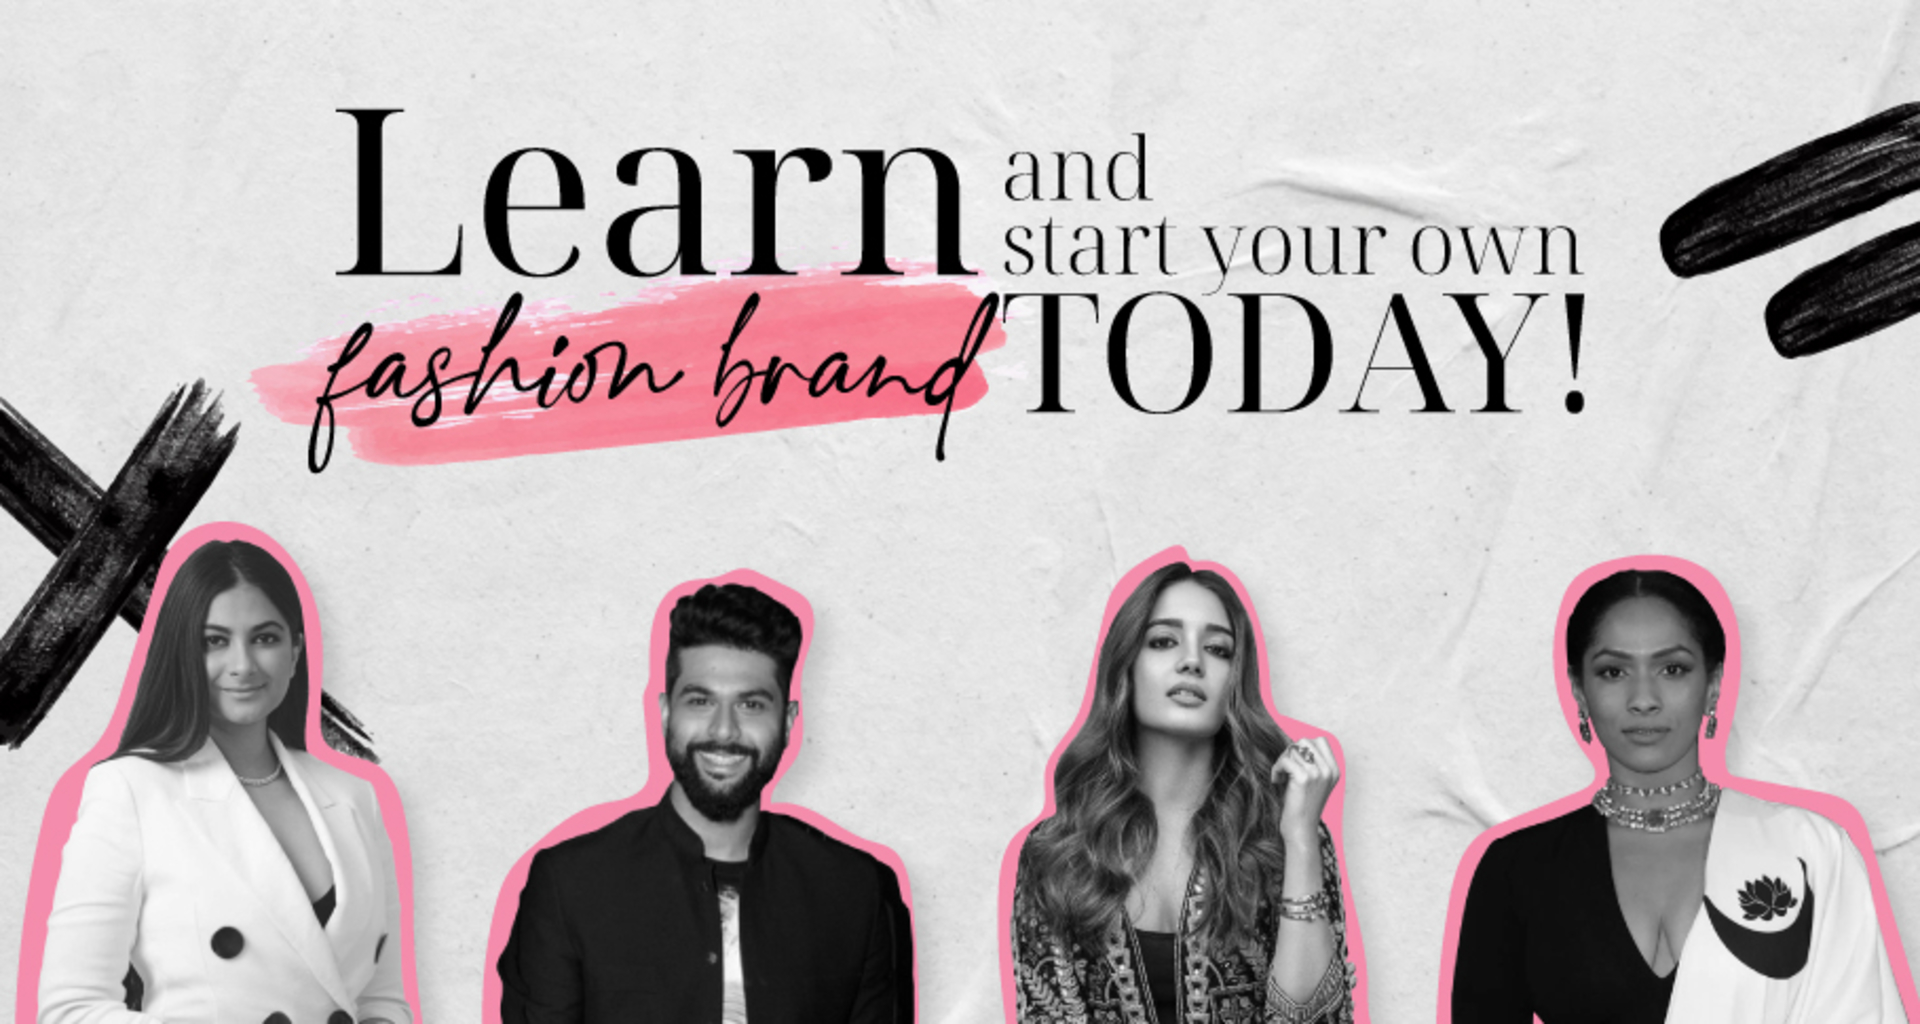 Learn and start your own fashion brand TODAY! image